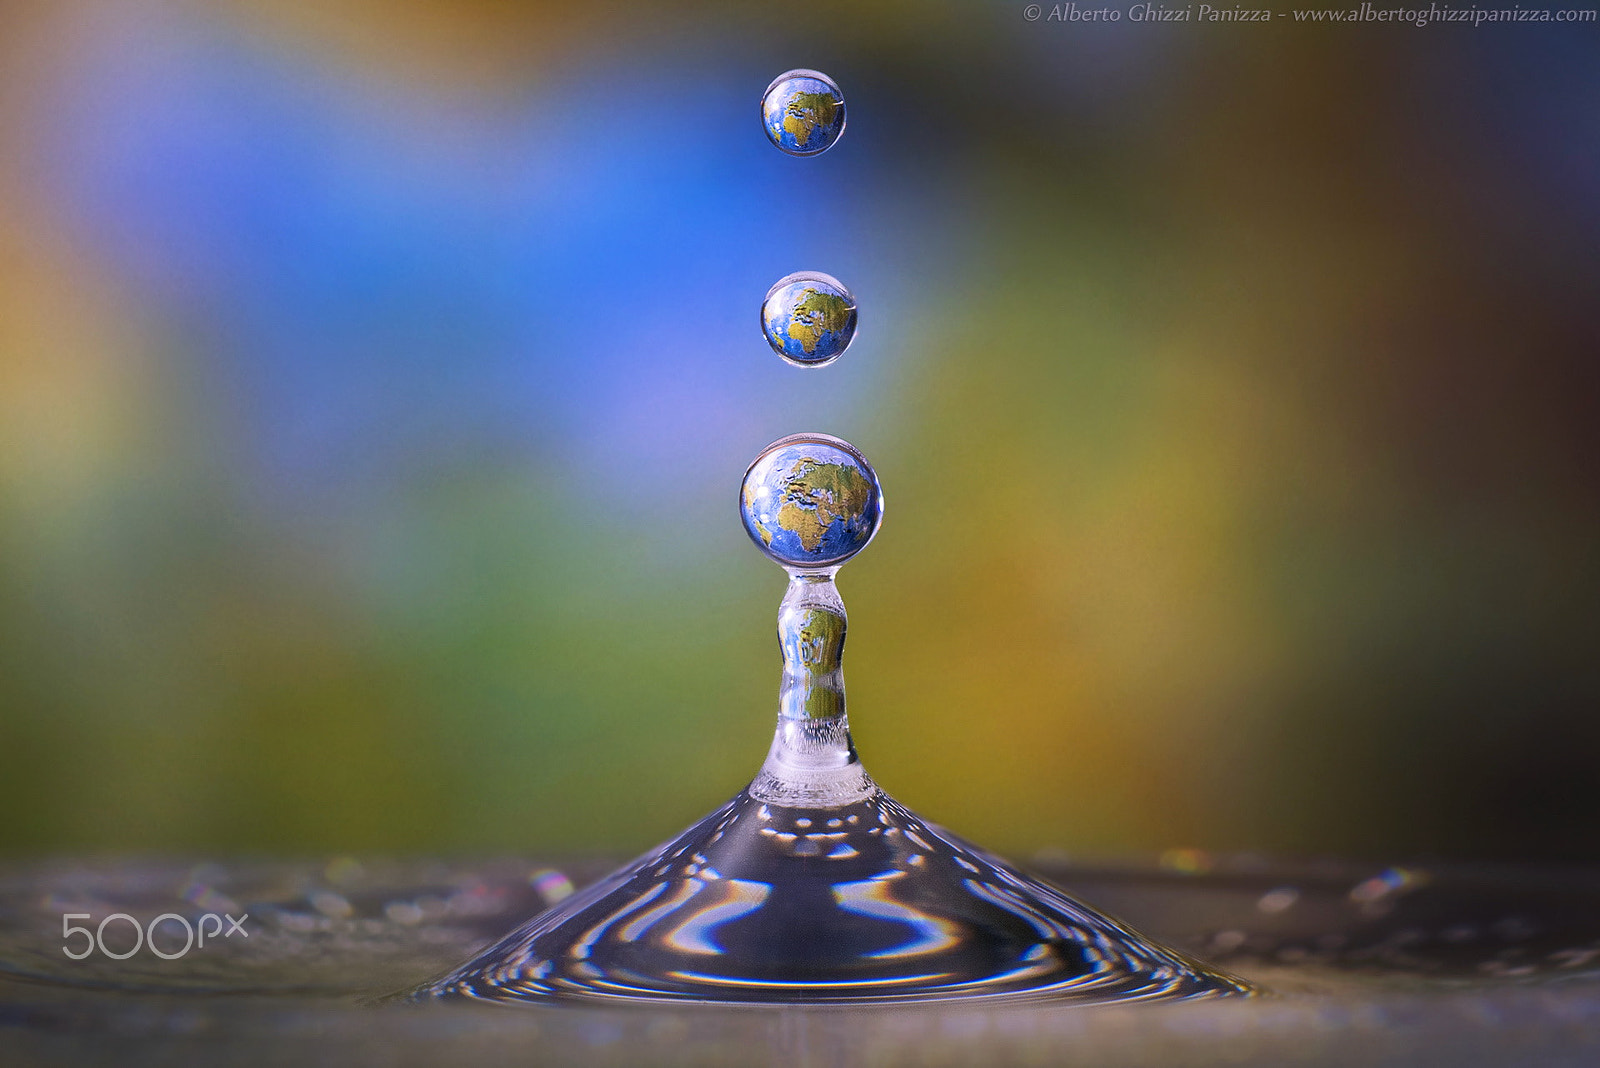 Nikon D810 sample photo. The world in a falling drop photography